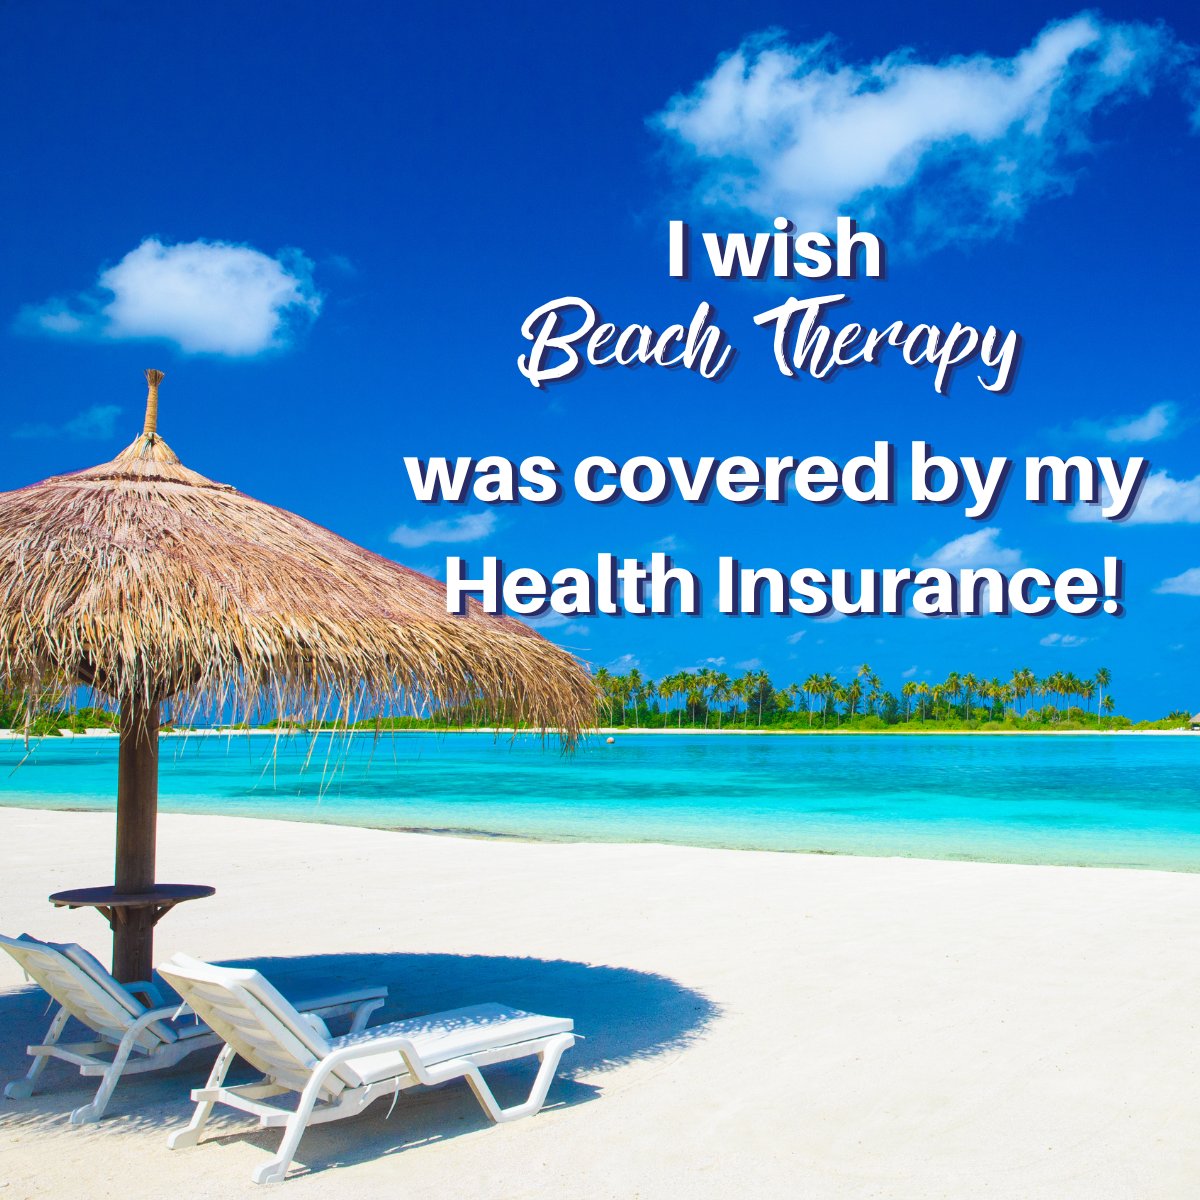 Wouldn't this be nice? !
Let's talk about what benefits you CAN provide your employees.
#AlKnowsInsurance #SmallBusinessInsurance #BeachTherapy #FeelGoodFriday